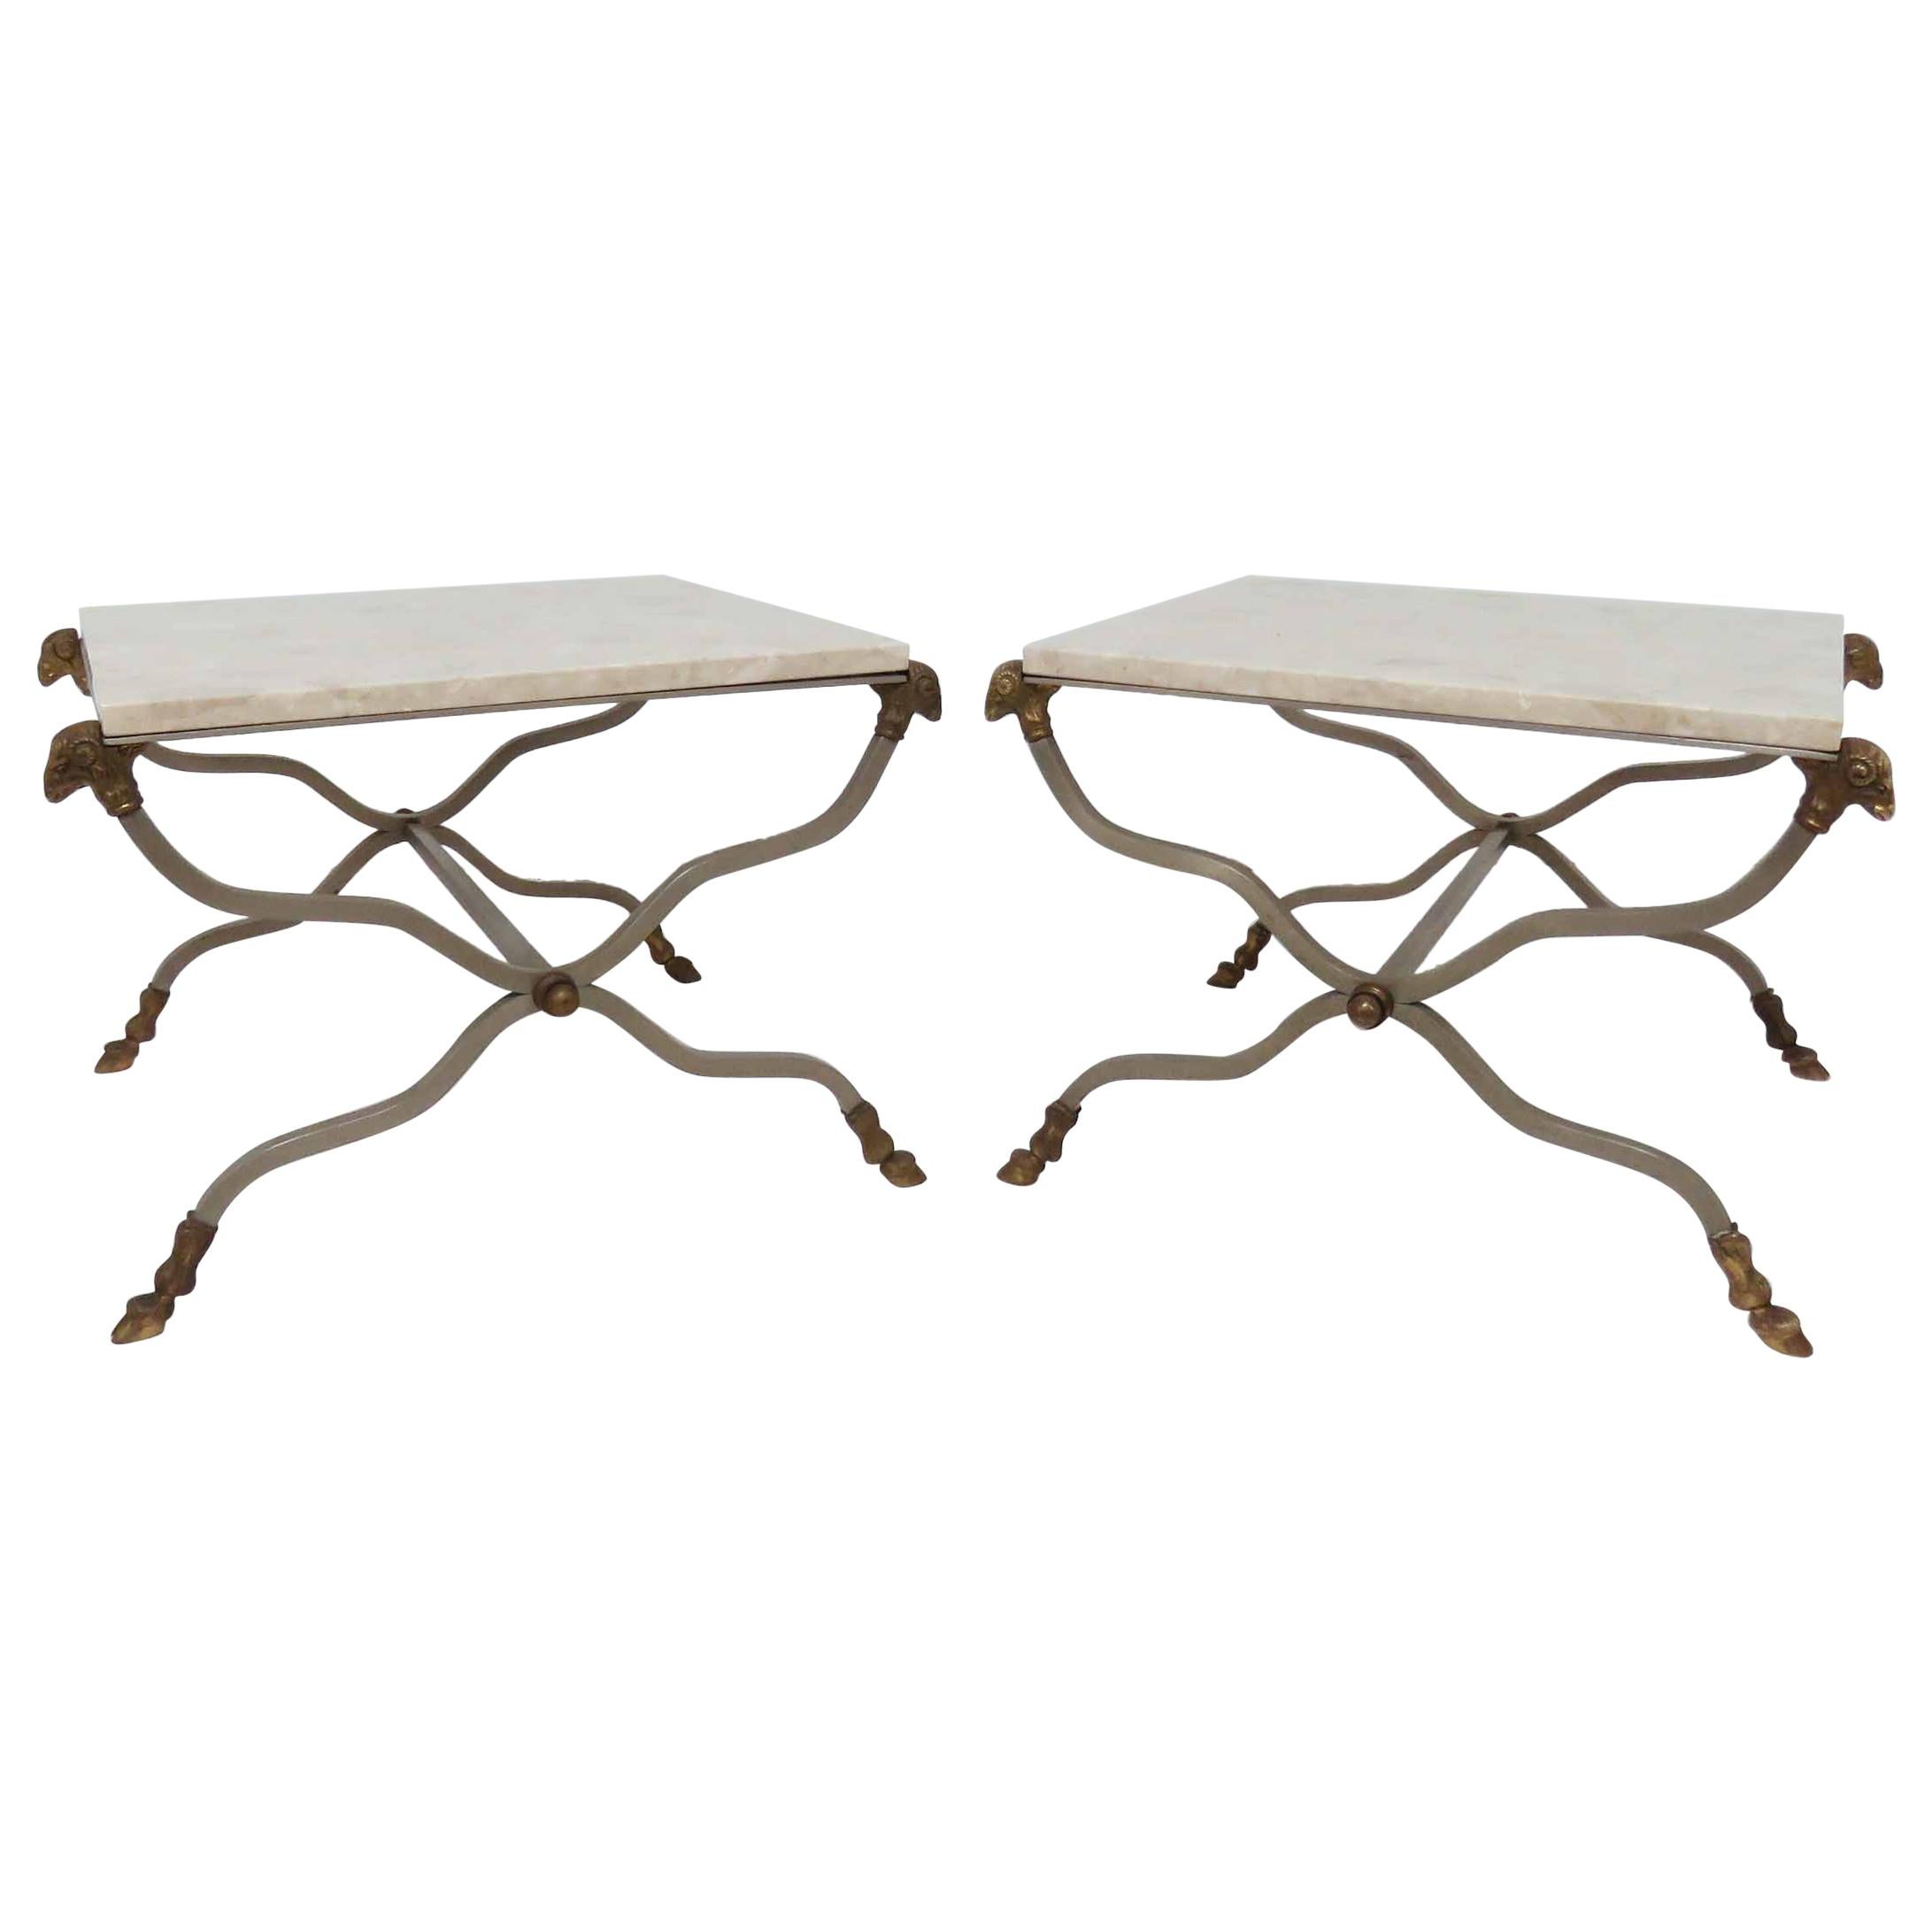 Pair of Italian X-Form End Tables with Ram's Head Accents and Travertine Tops